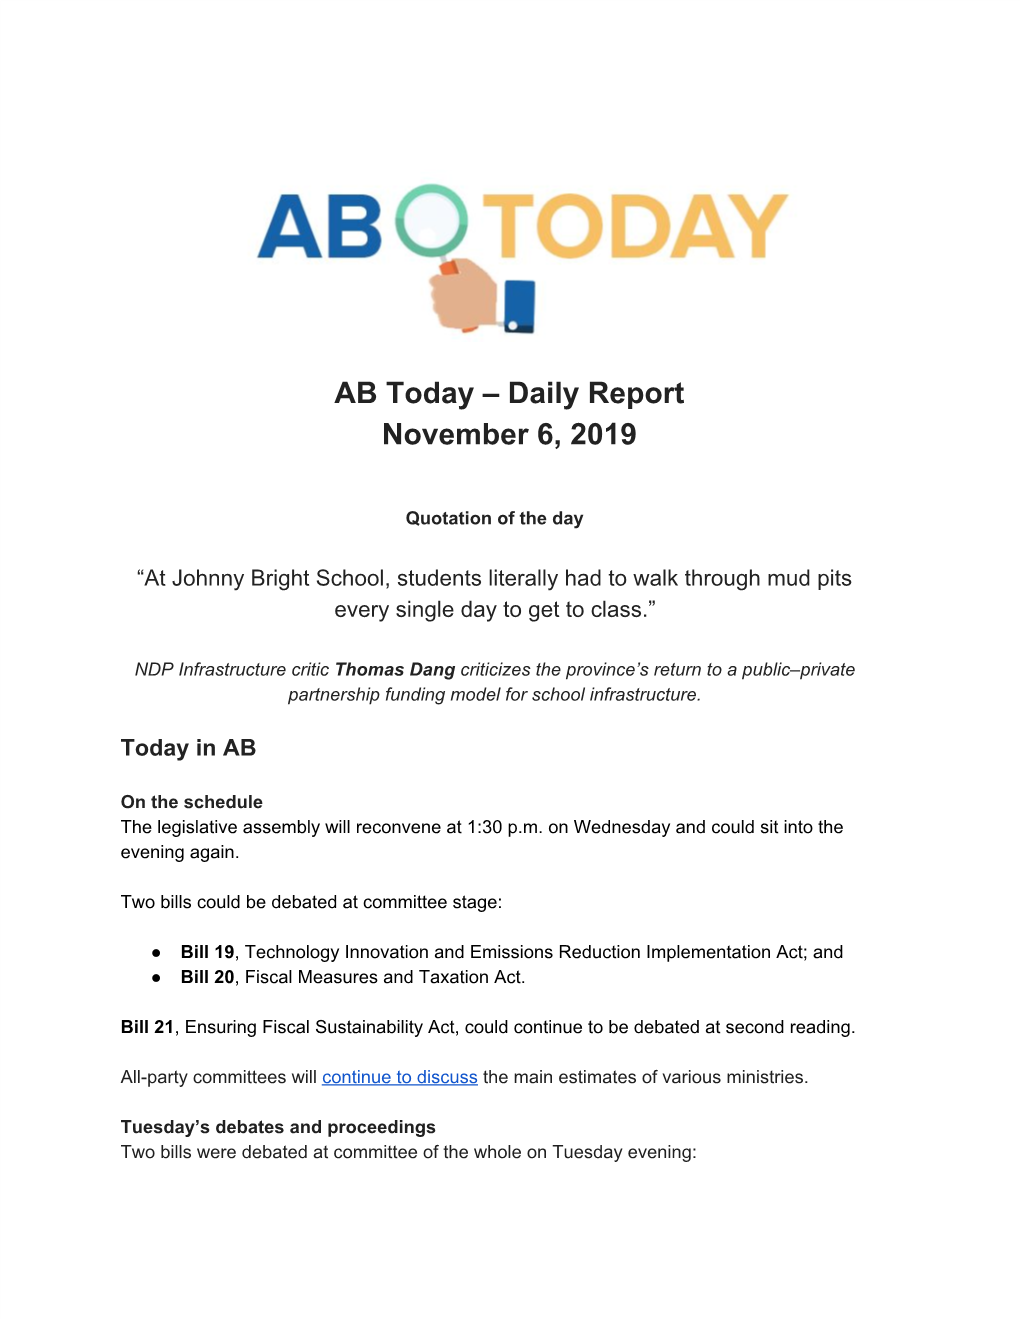 AB Today – Daily Report November 6, 2019